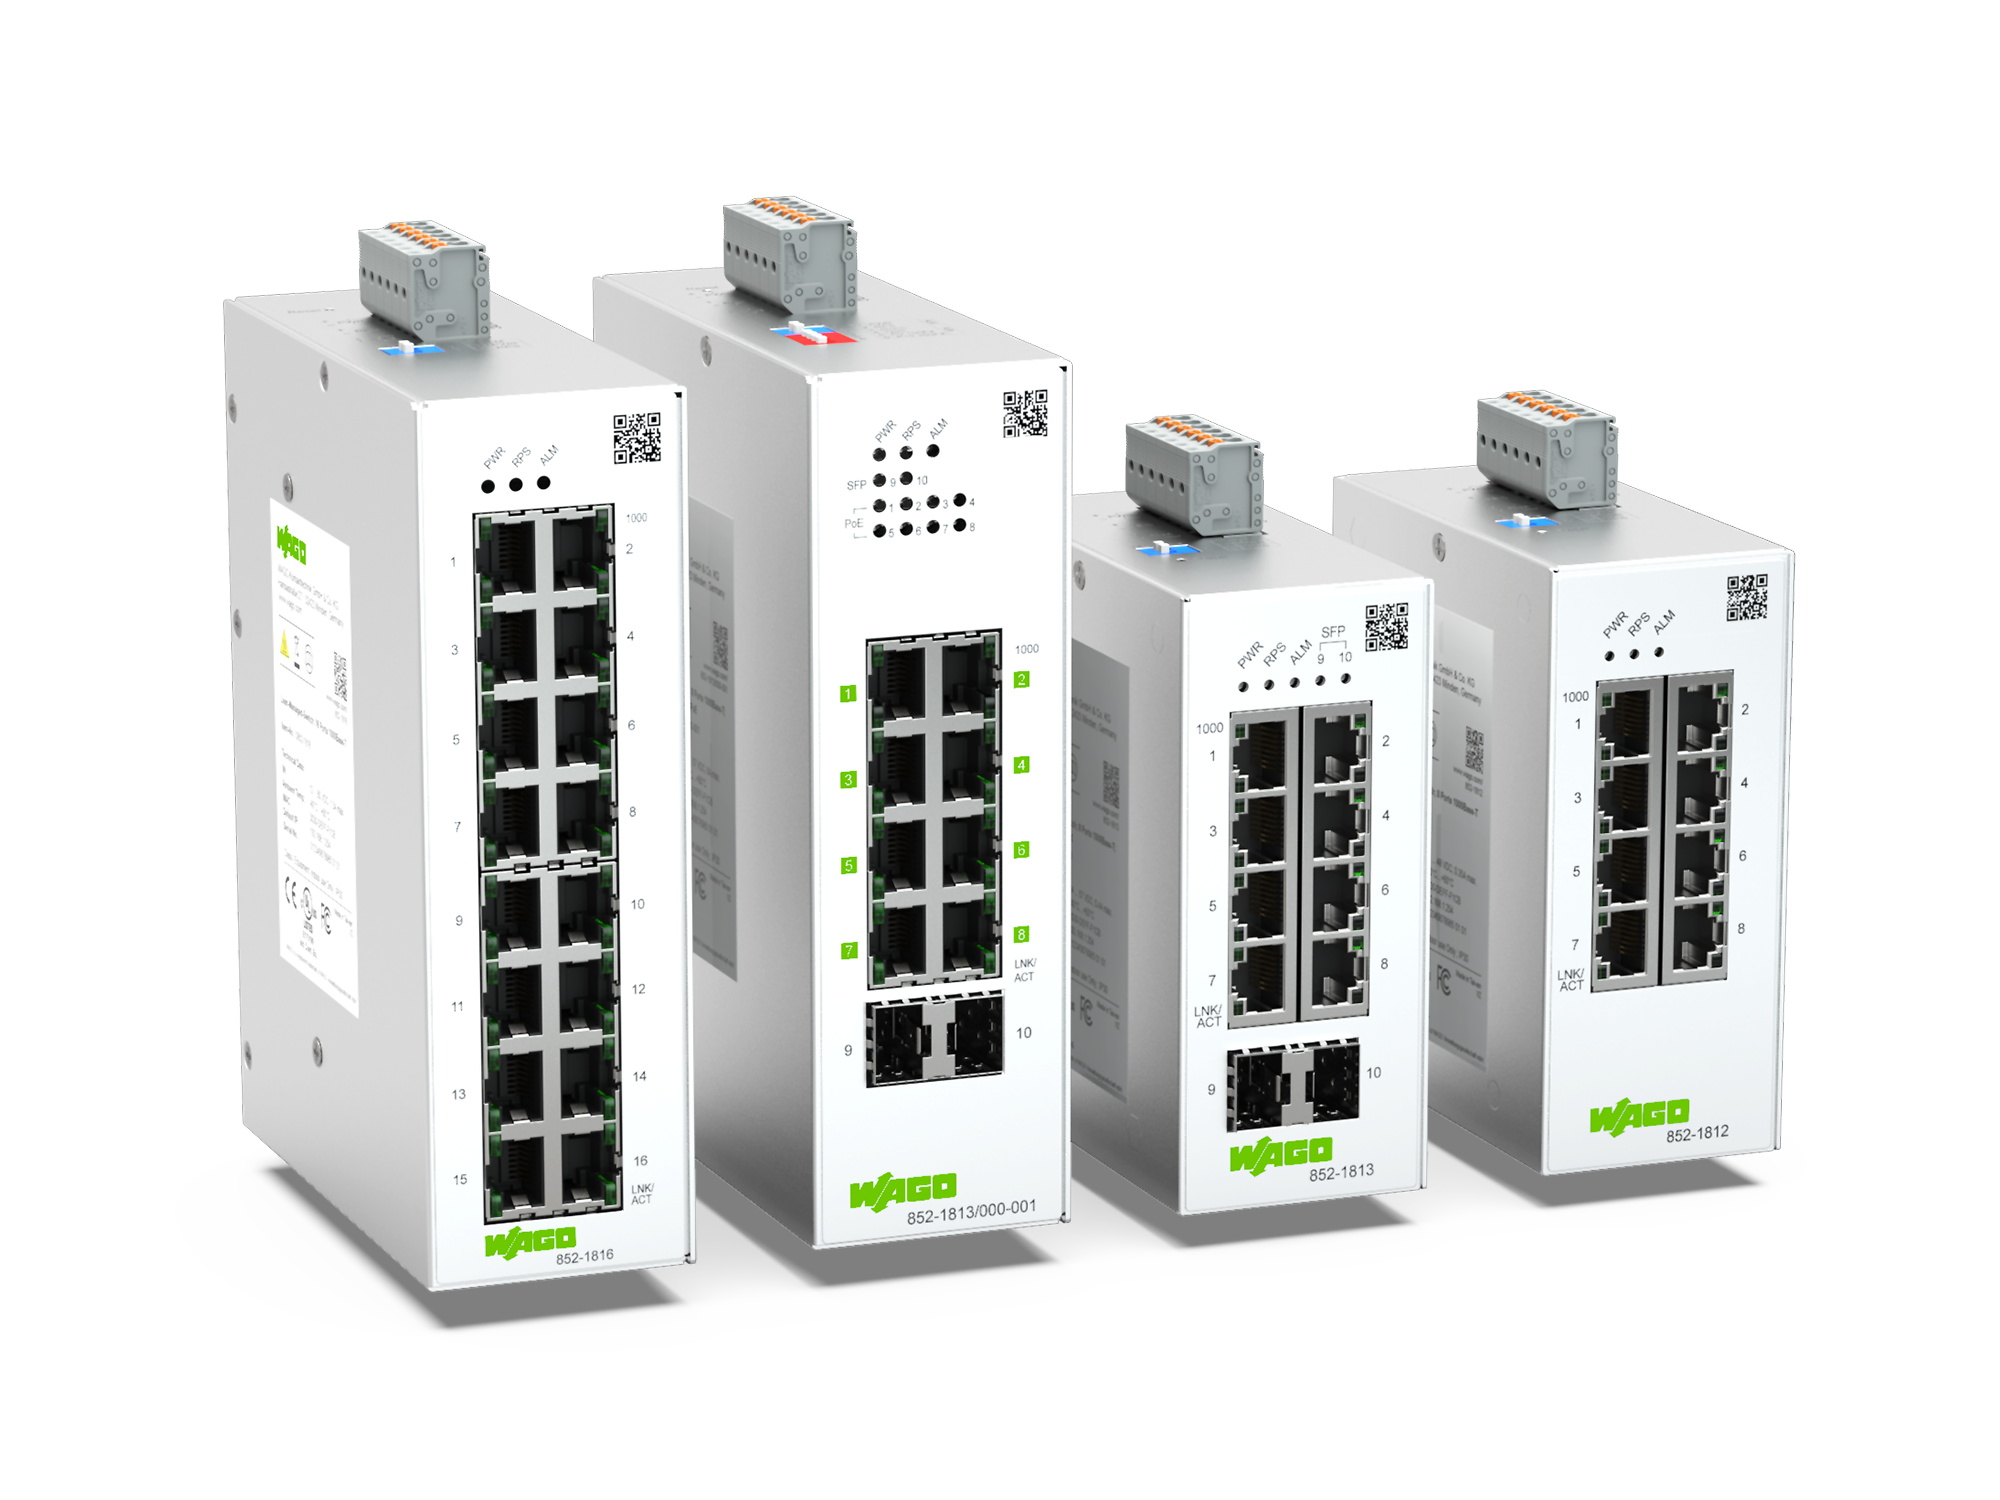 Lean Managed Switches